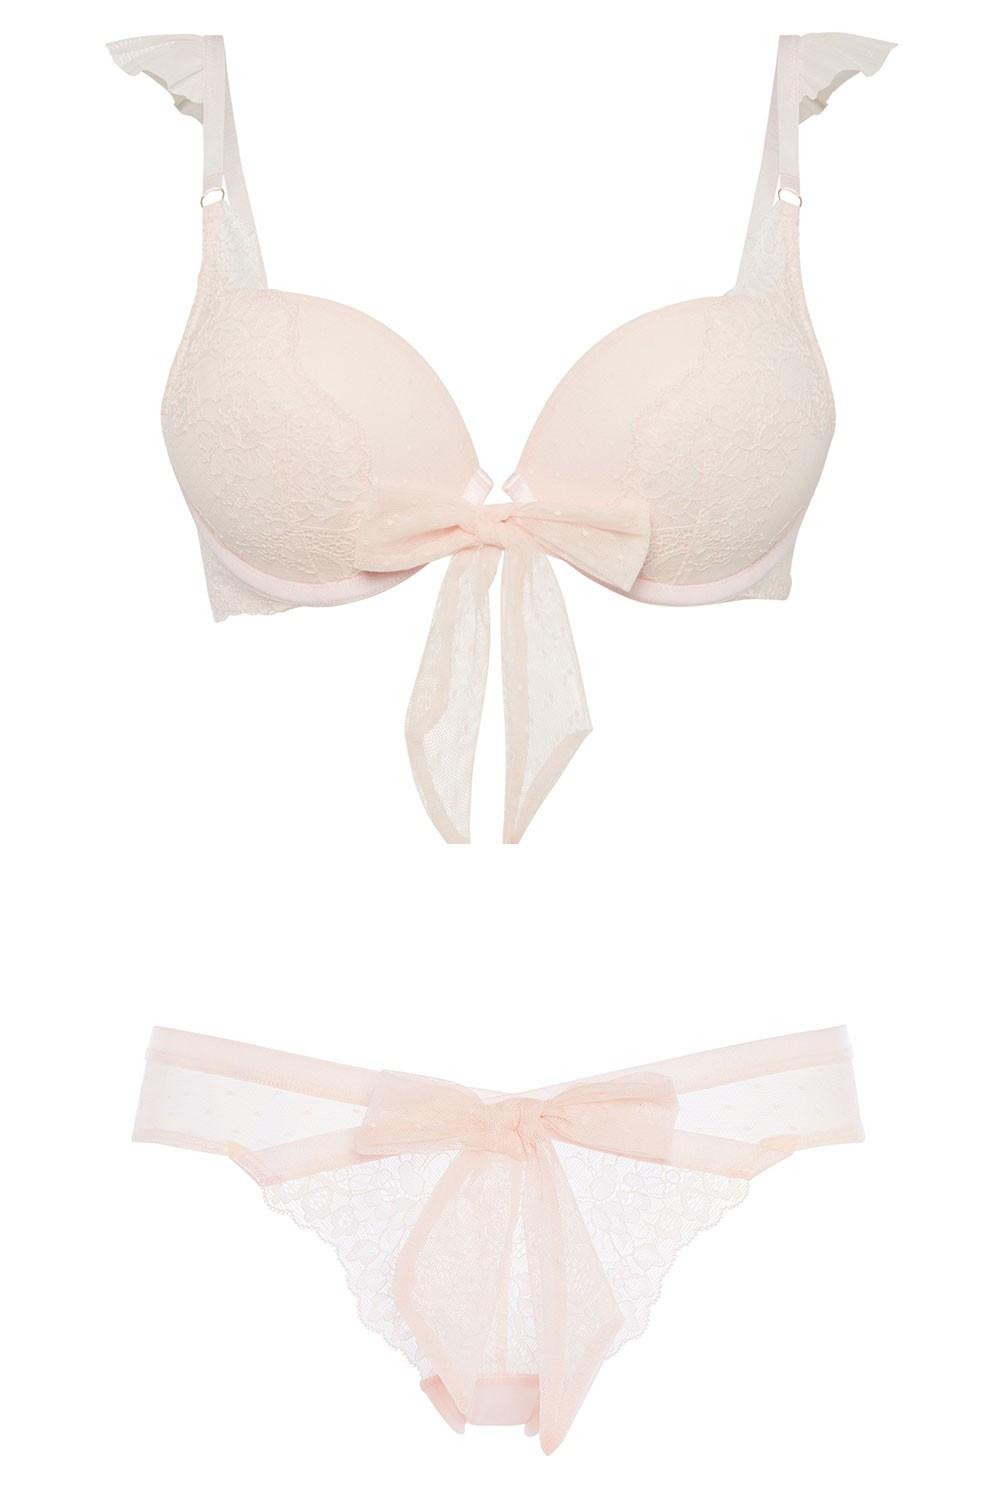 Primark Valentine's Day Collection: The Best Gifts and Lingerie -   